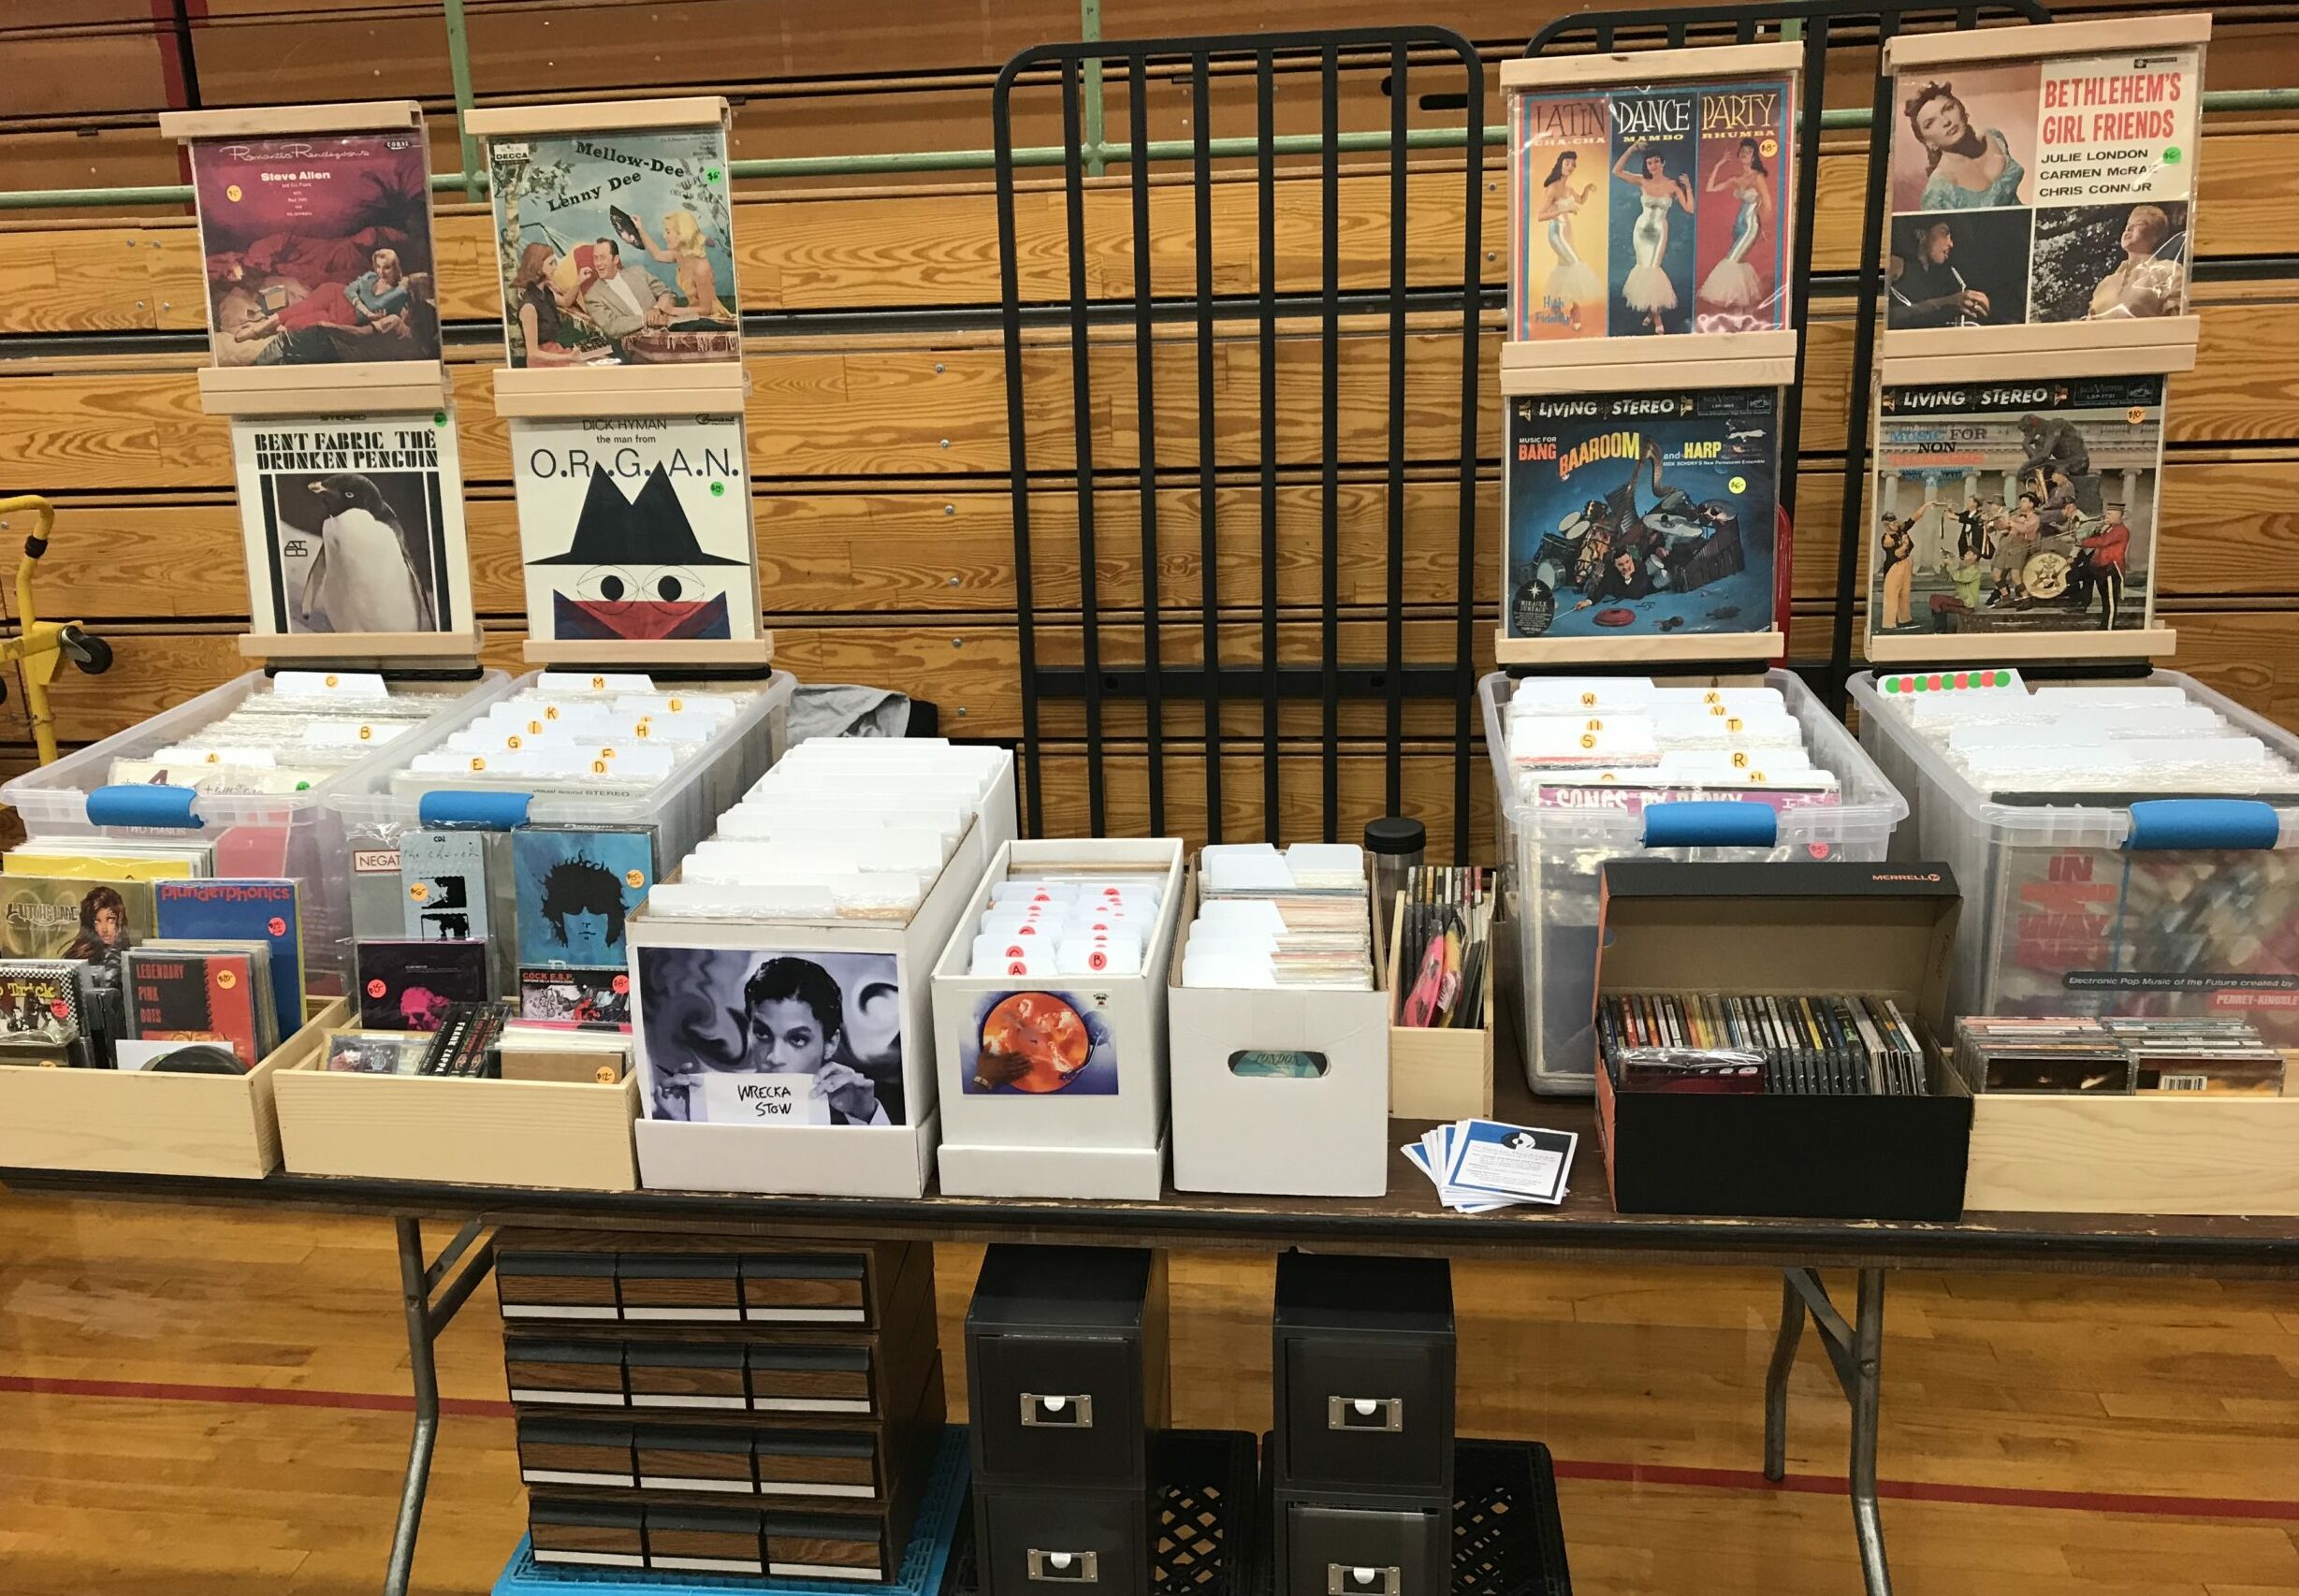 Canby Record Show • Apr 15 2018